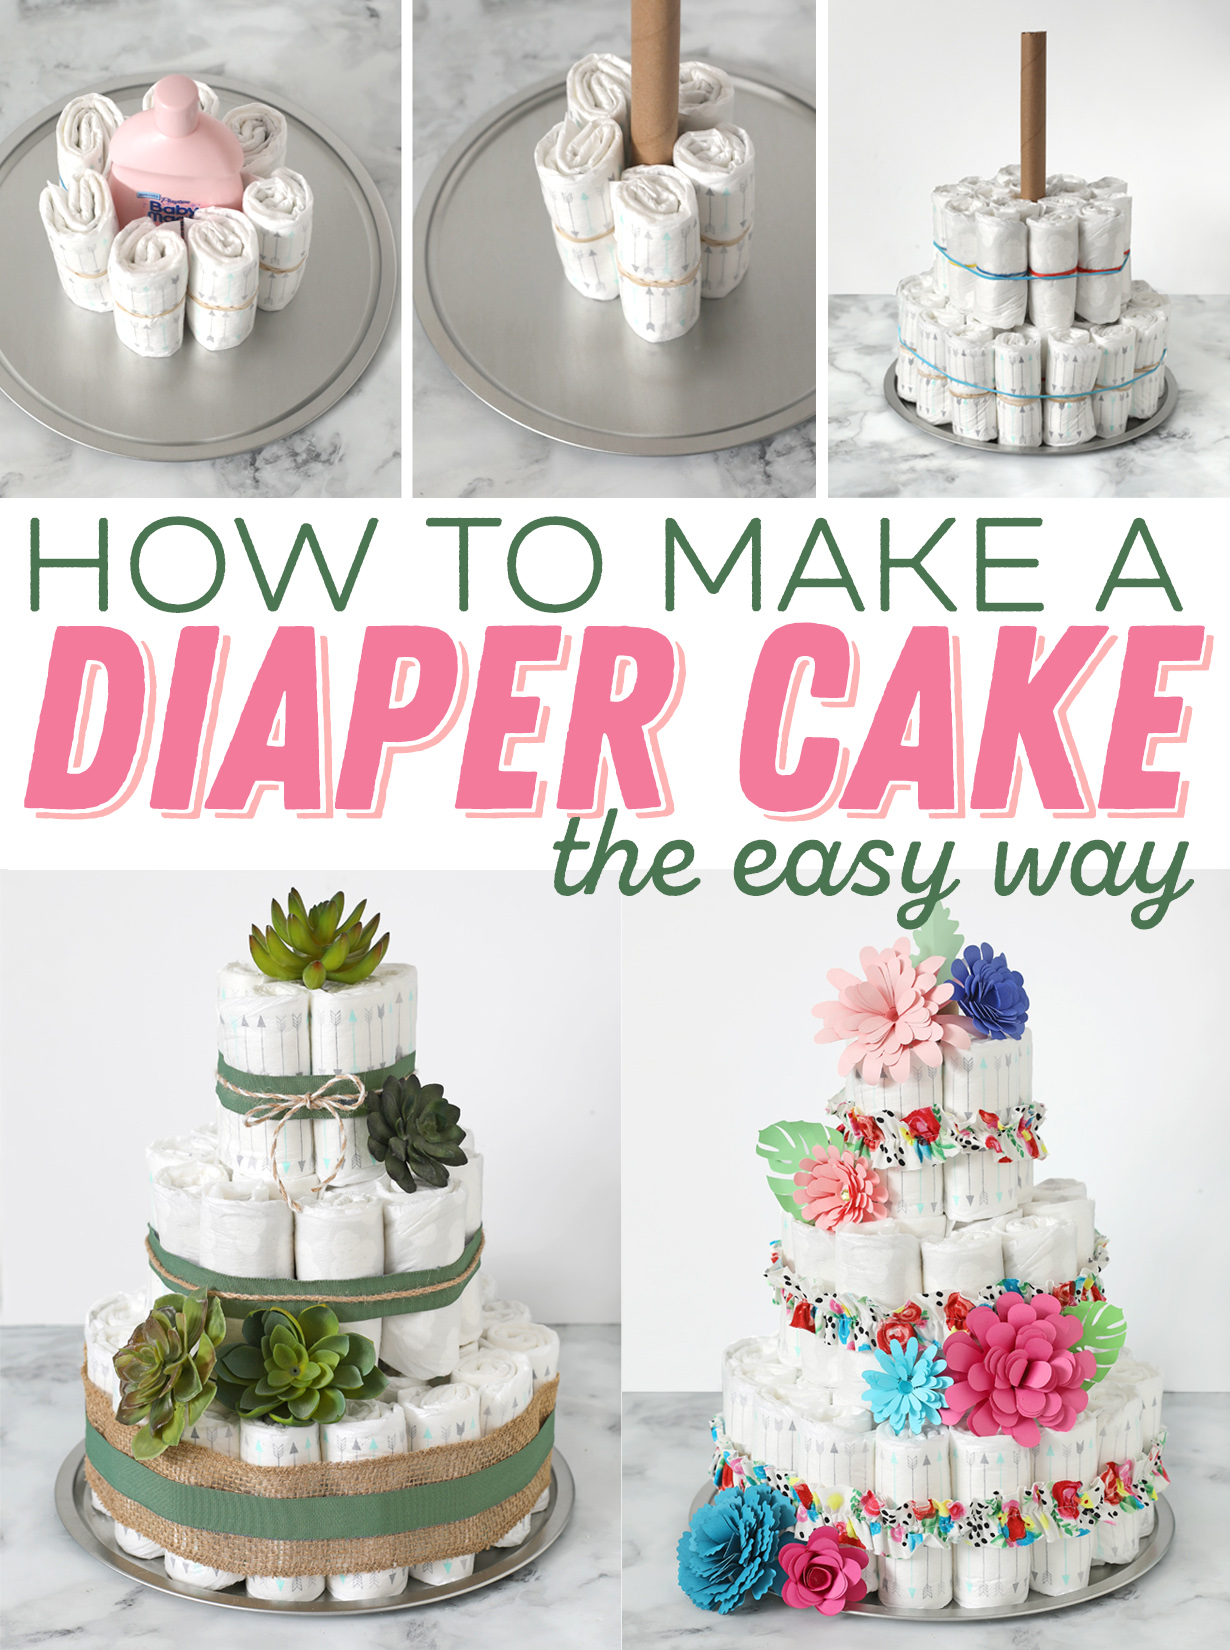 How To Make A Diaper Cake The Easy Way The Craft Patch,Nursing Jobs From Home Florida